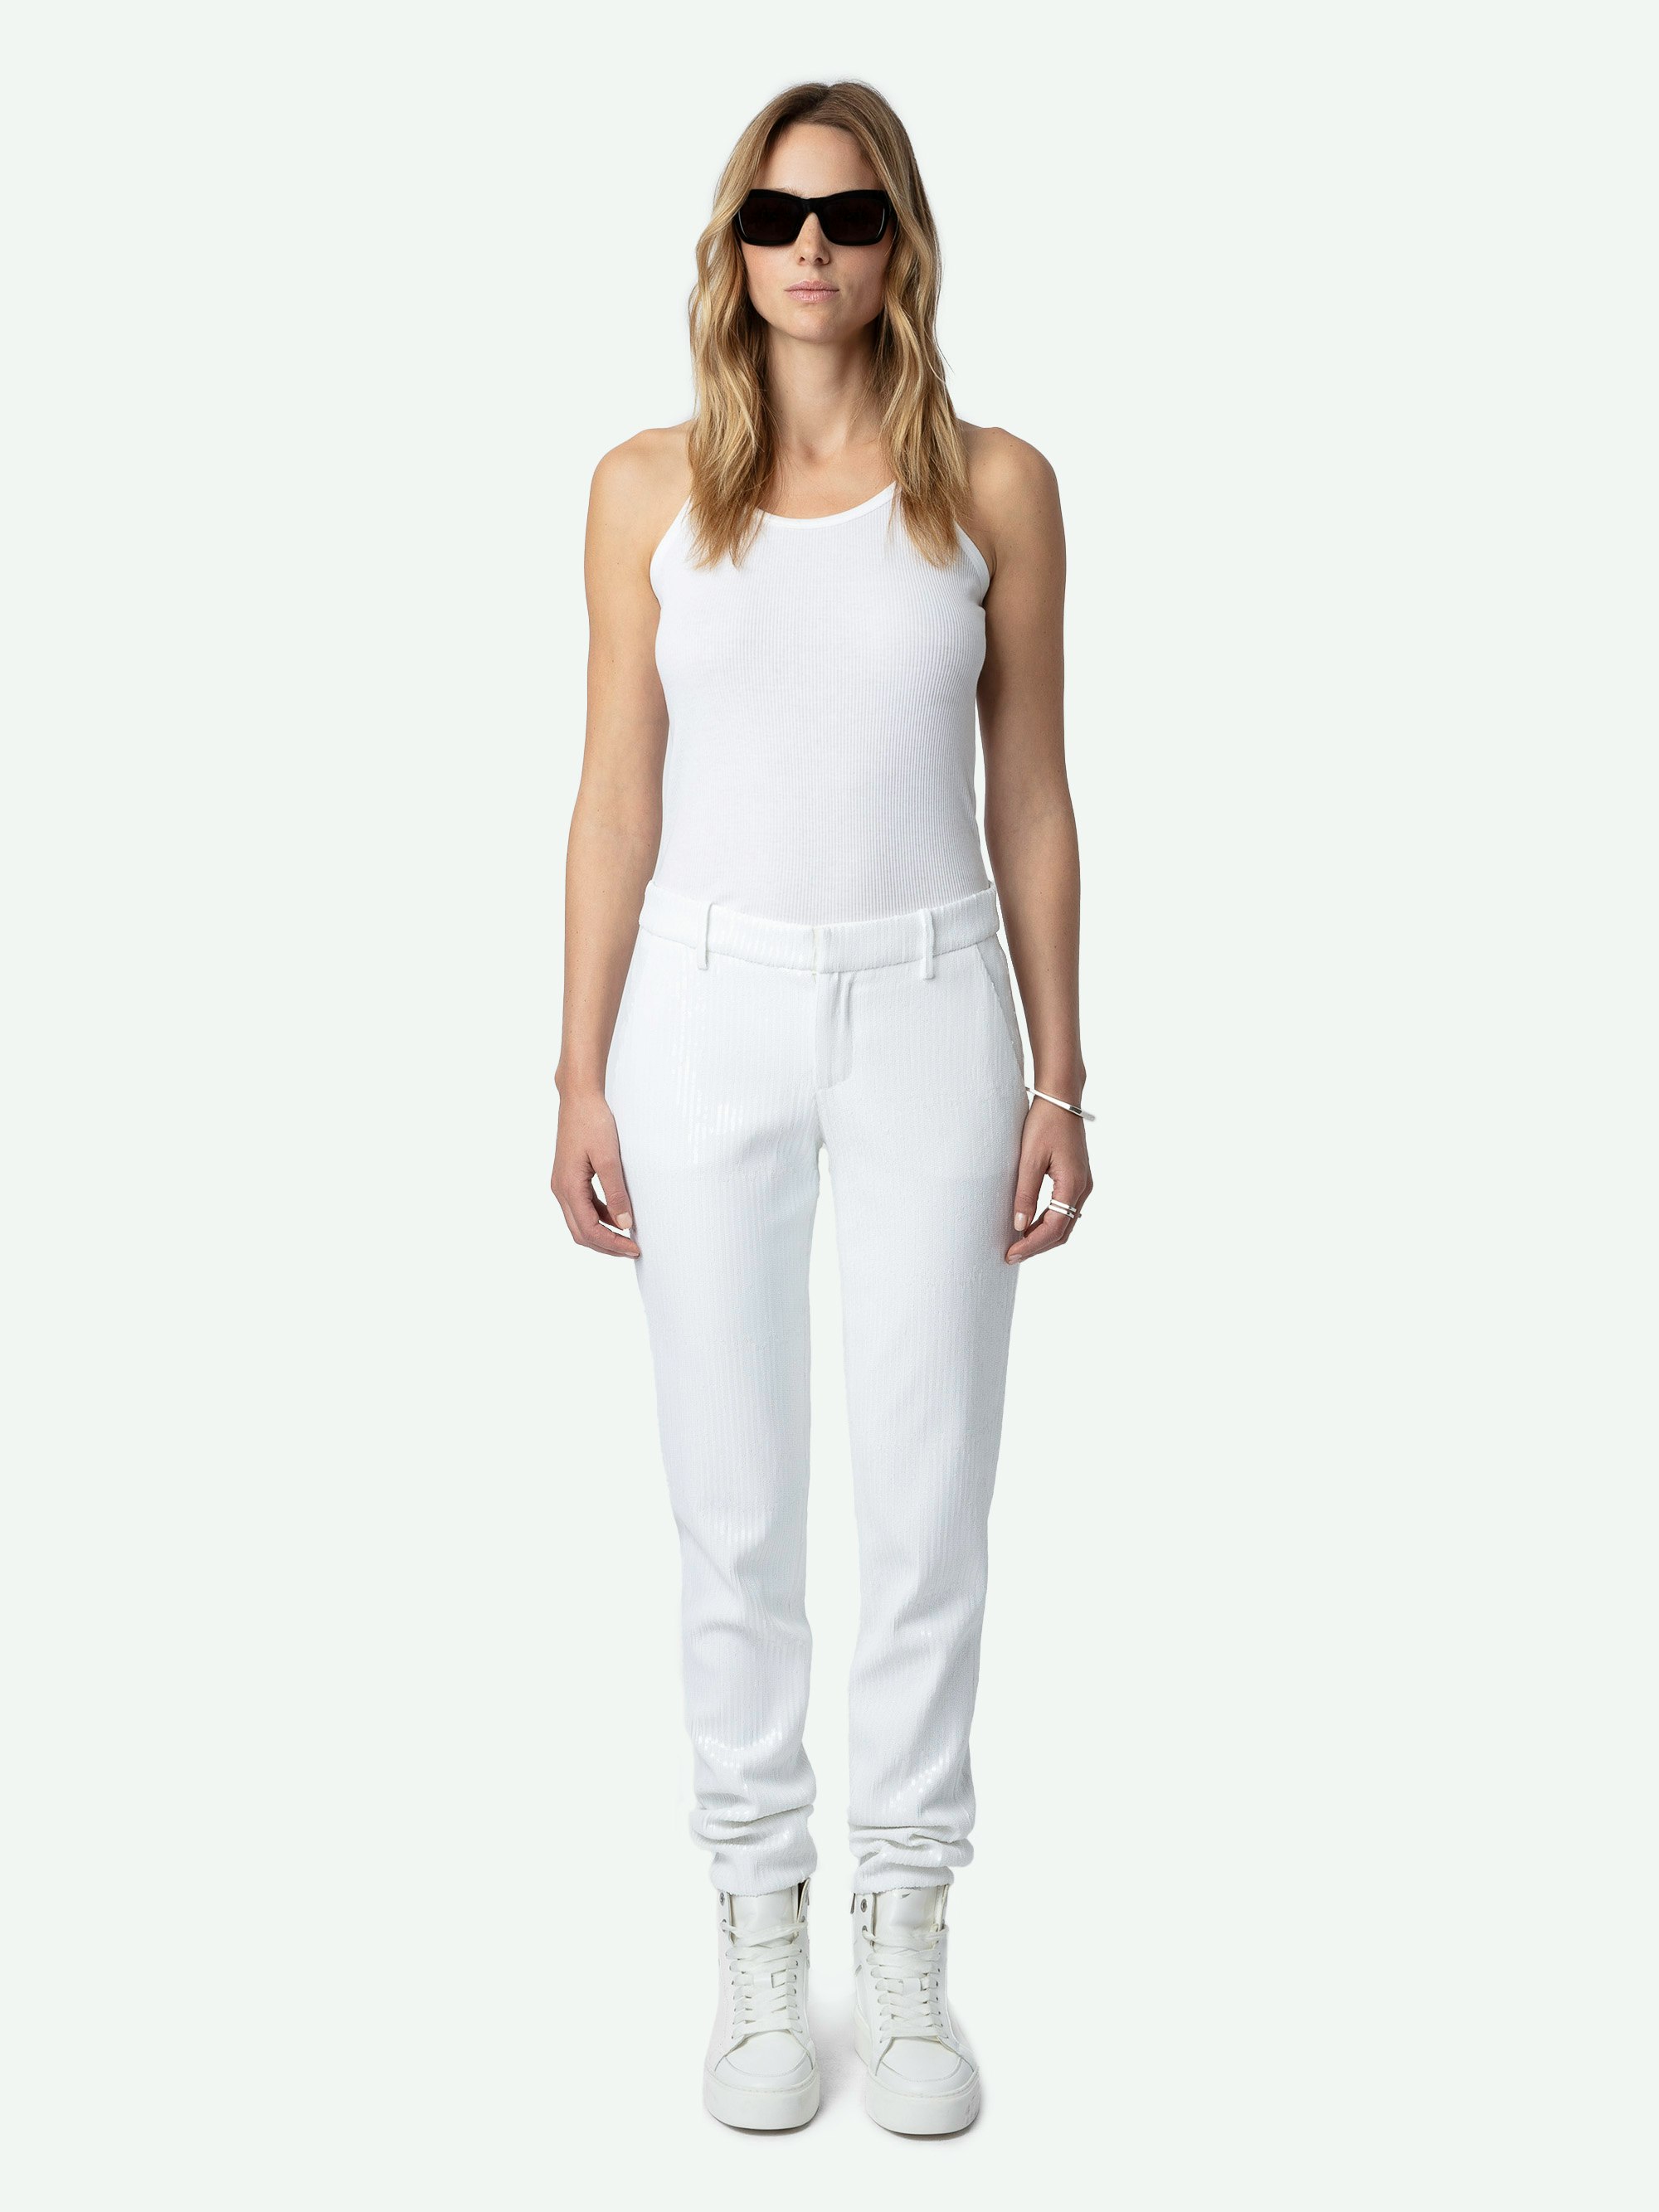 Prune Sequin Trousers - White straight-leg suit trousers with sequins and pockets.